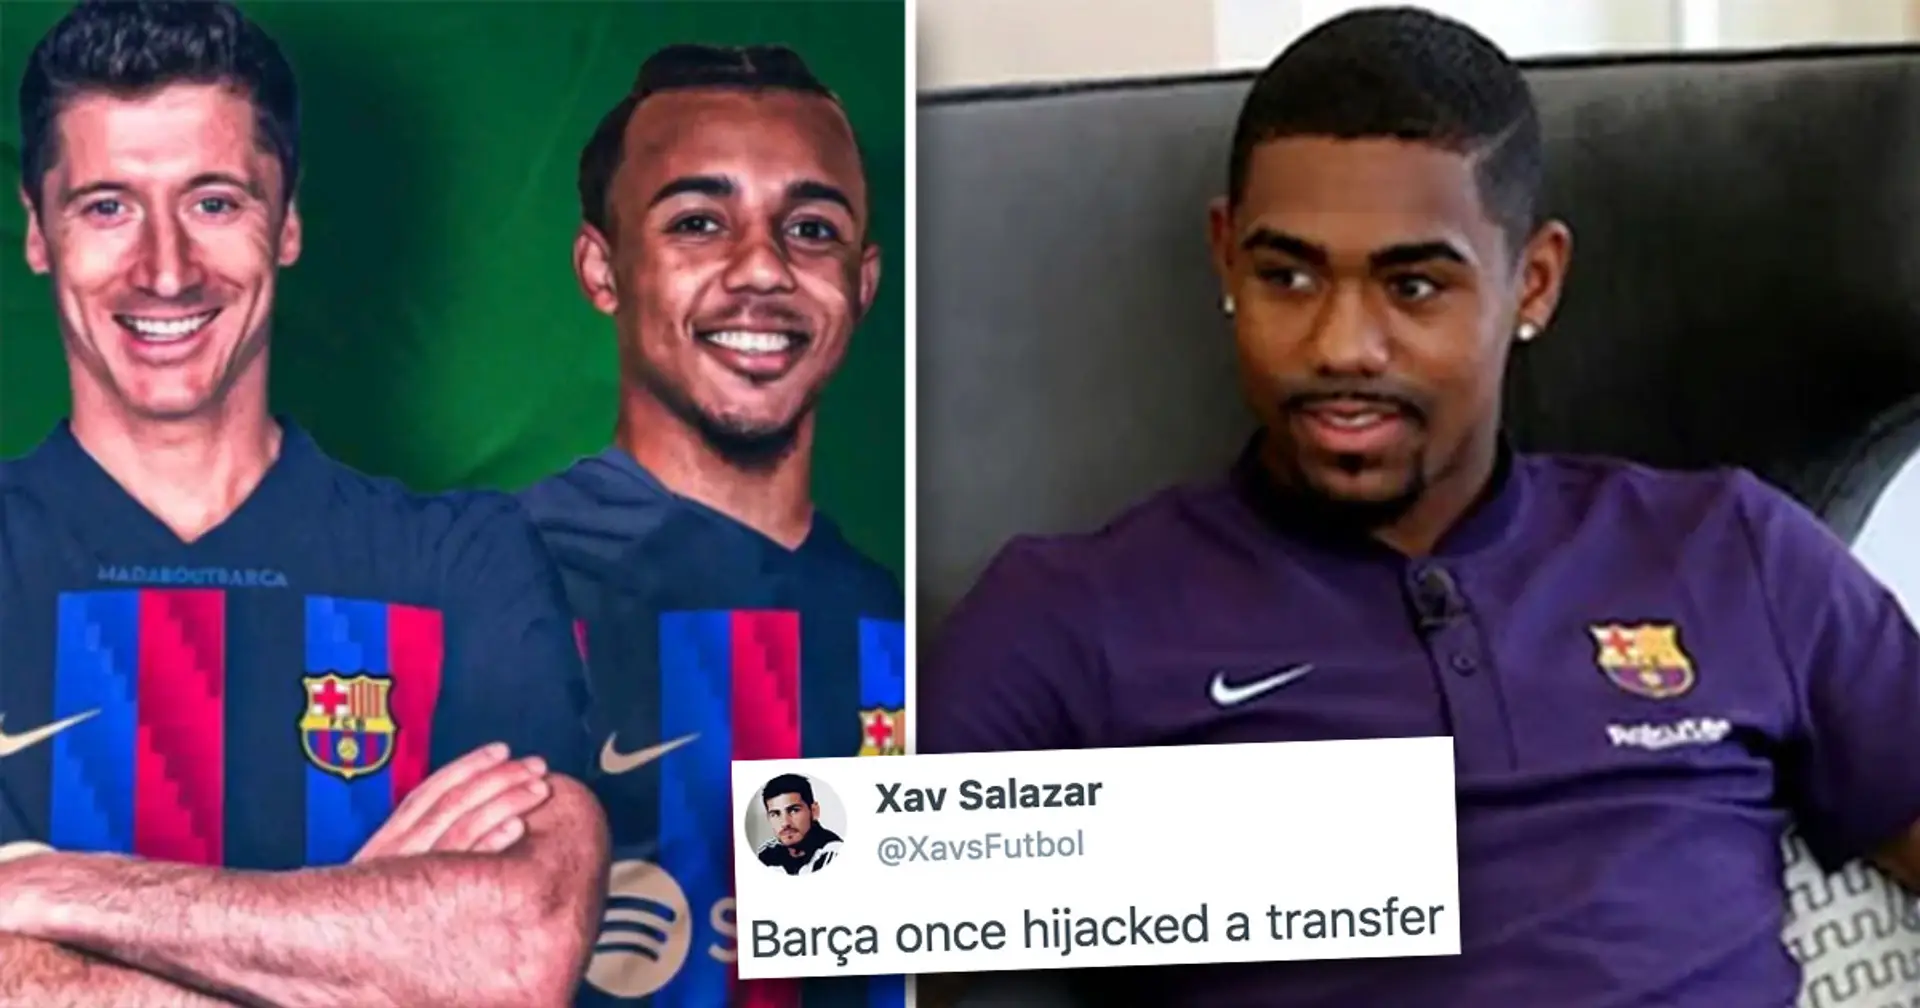 'You don't know who they are': Real Madrid fan describes Barca's pull strength with one transfer story from 2018